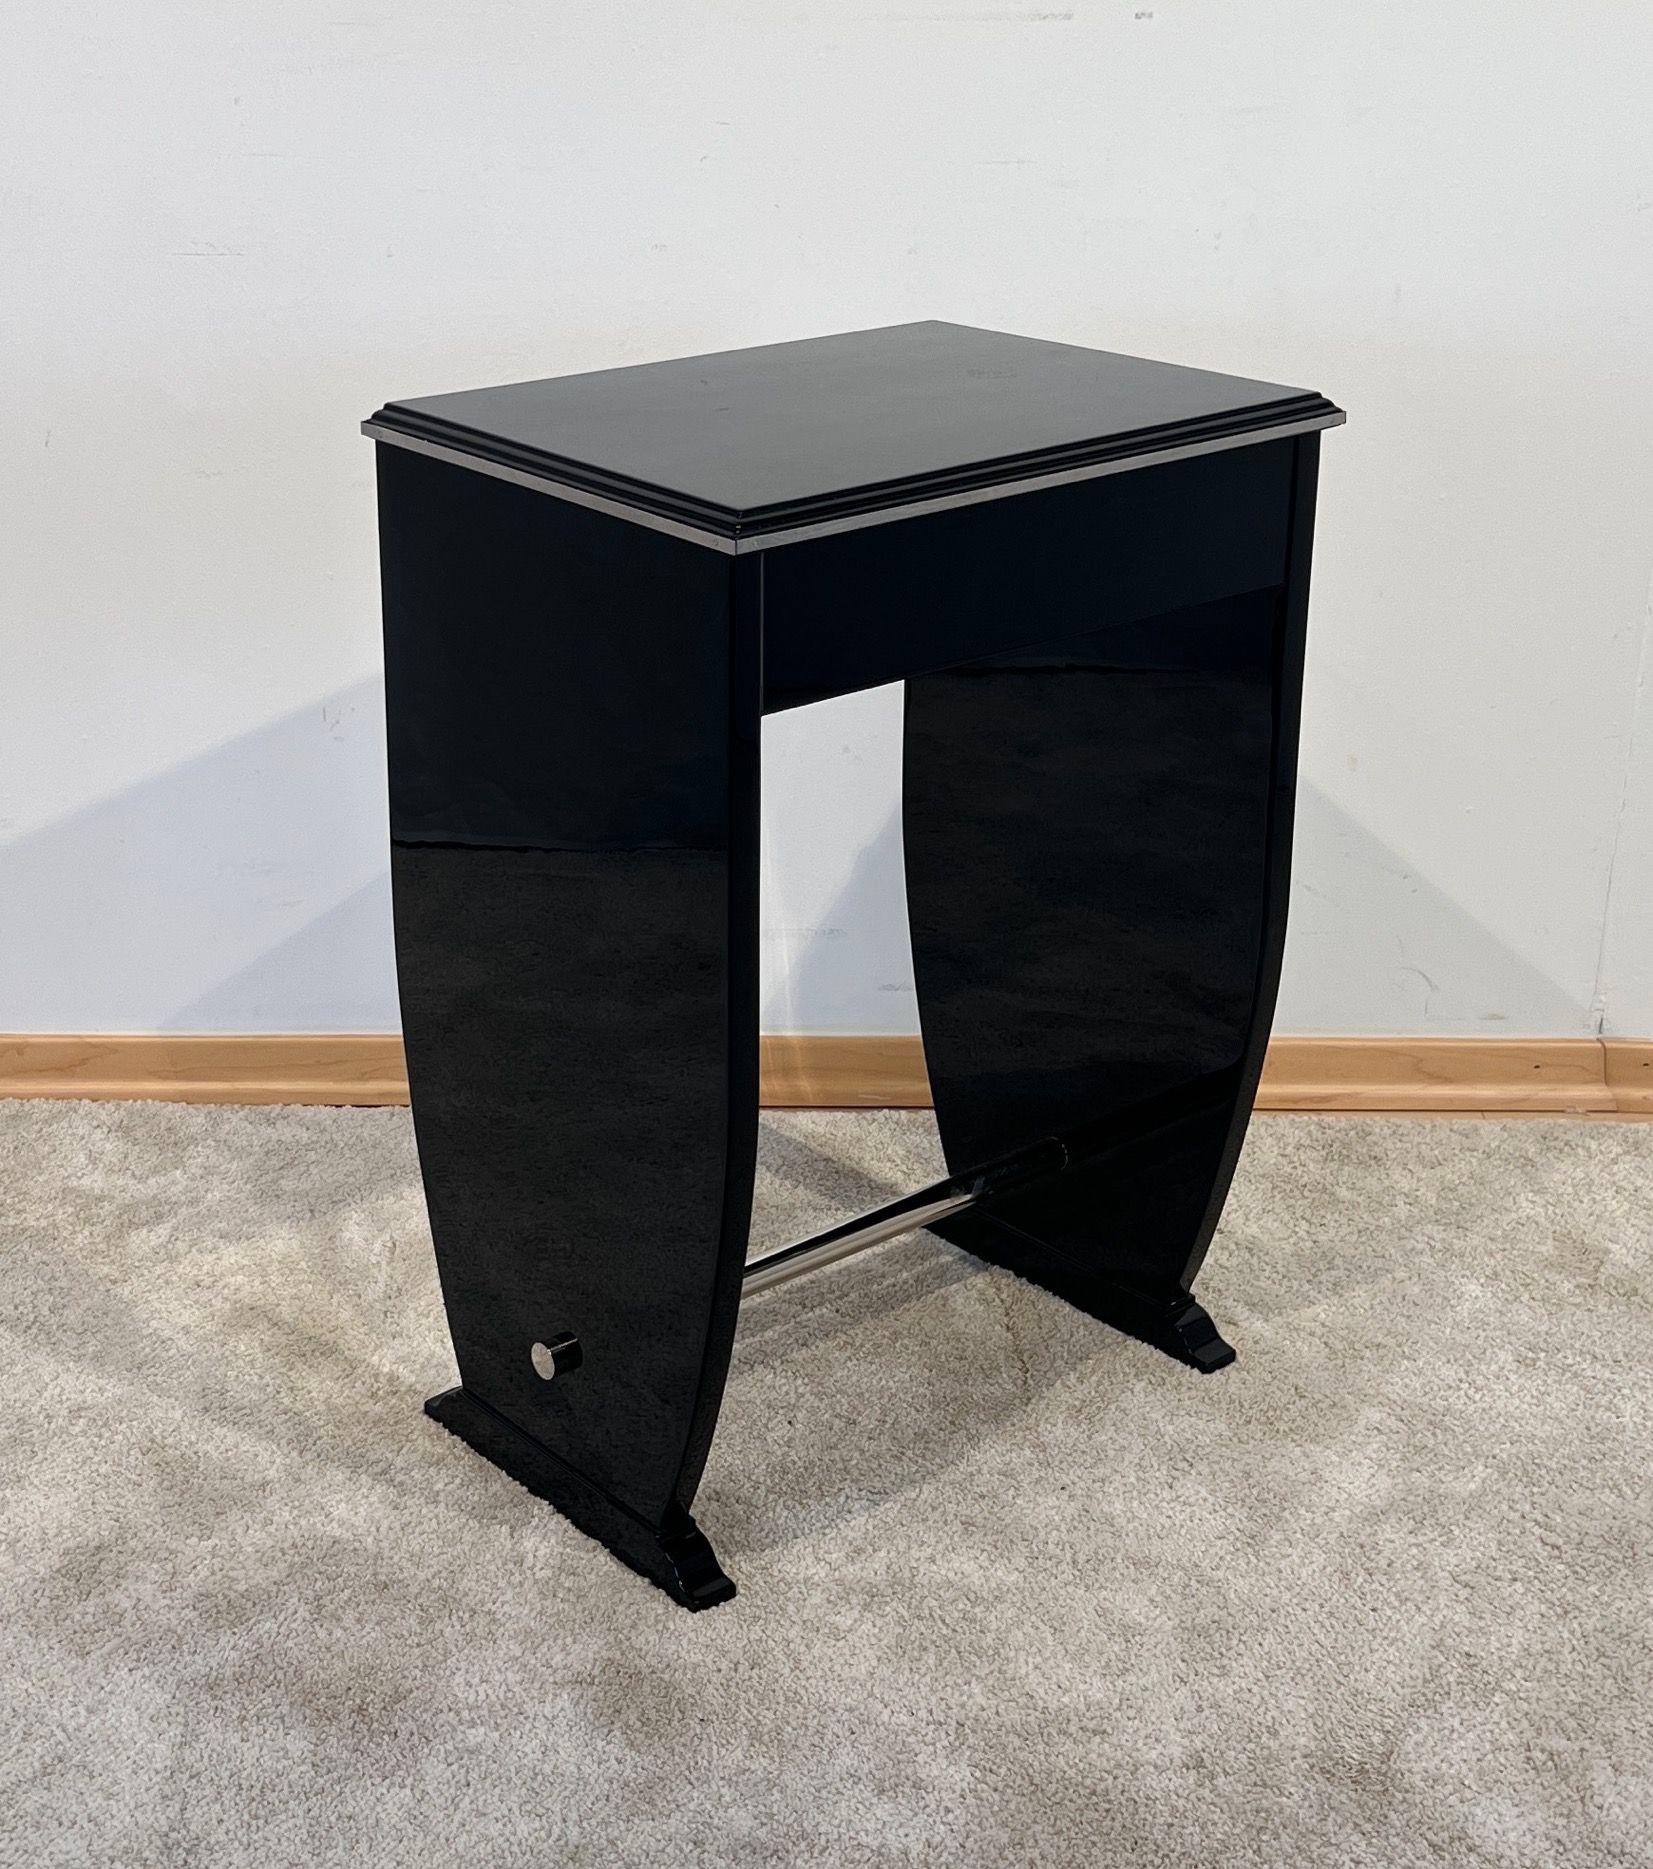 Mid-20th Century Art Deco Side Table with Drawer, Black Lacquer and Chrome, France circa 1930 For Sale